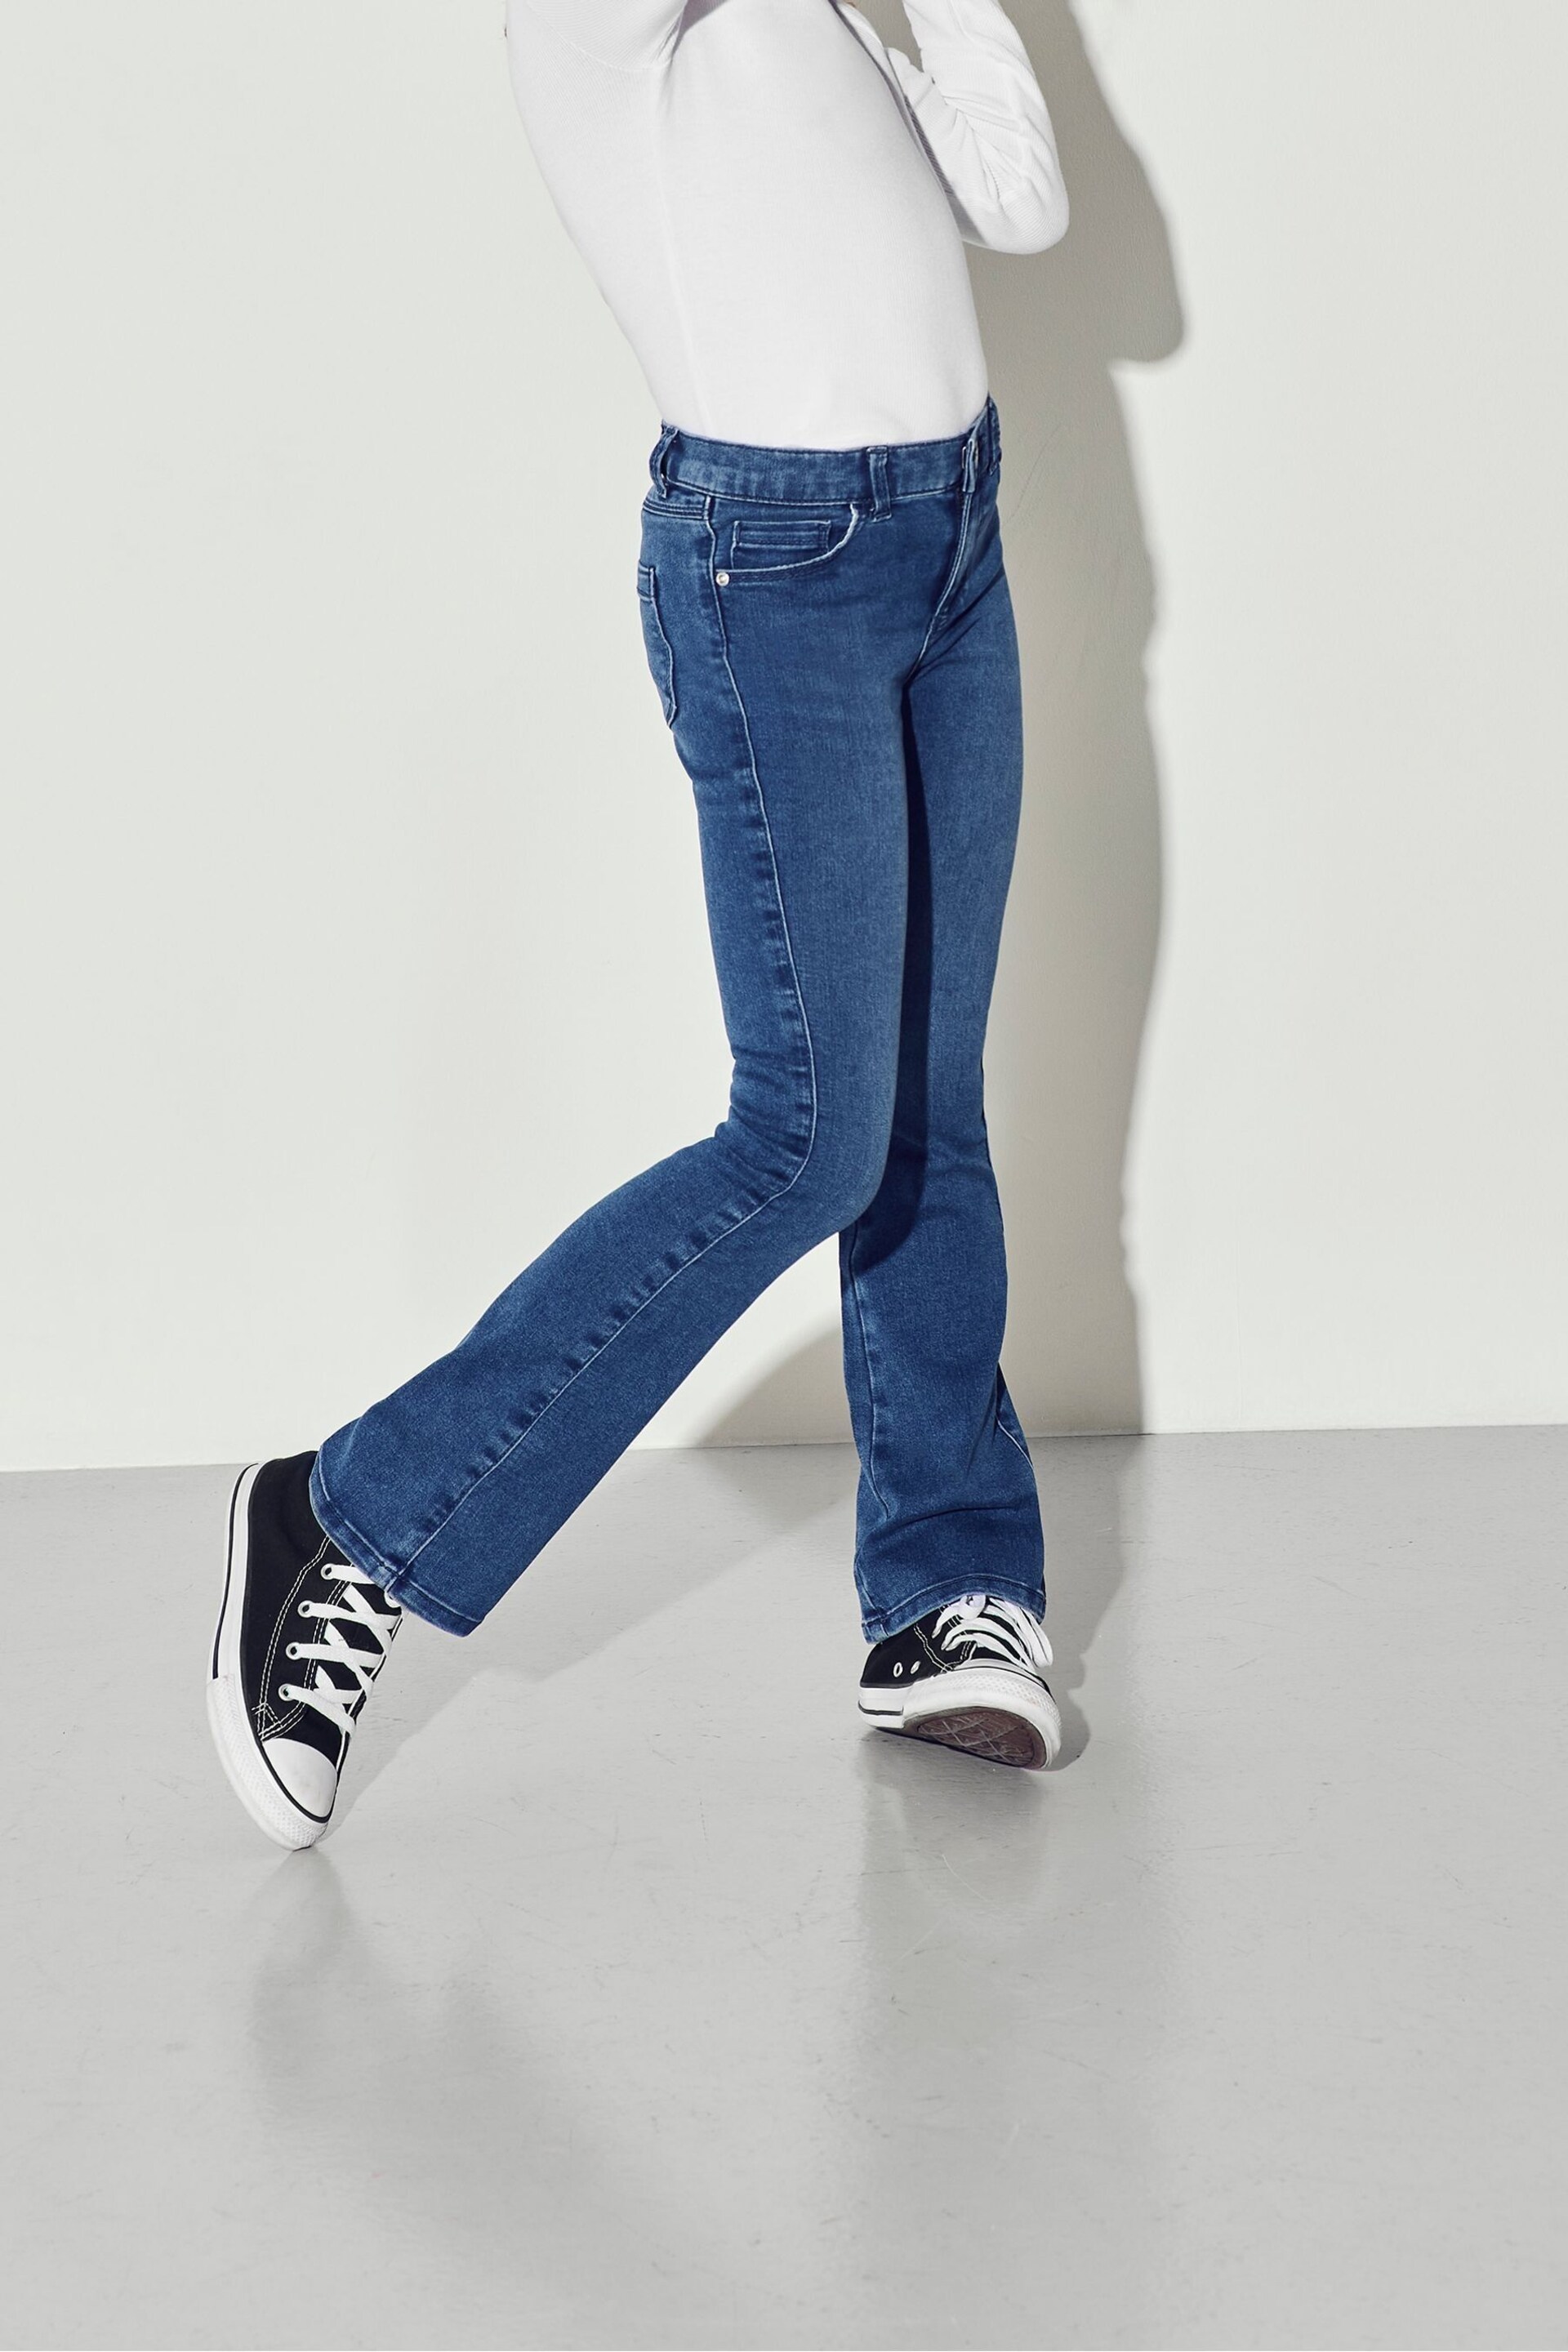 ONLY KIDS Flare Leg Jeans With Adjustable Waist - Image 1 of 5